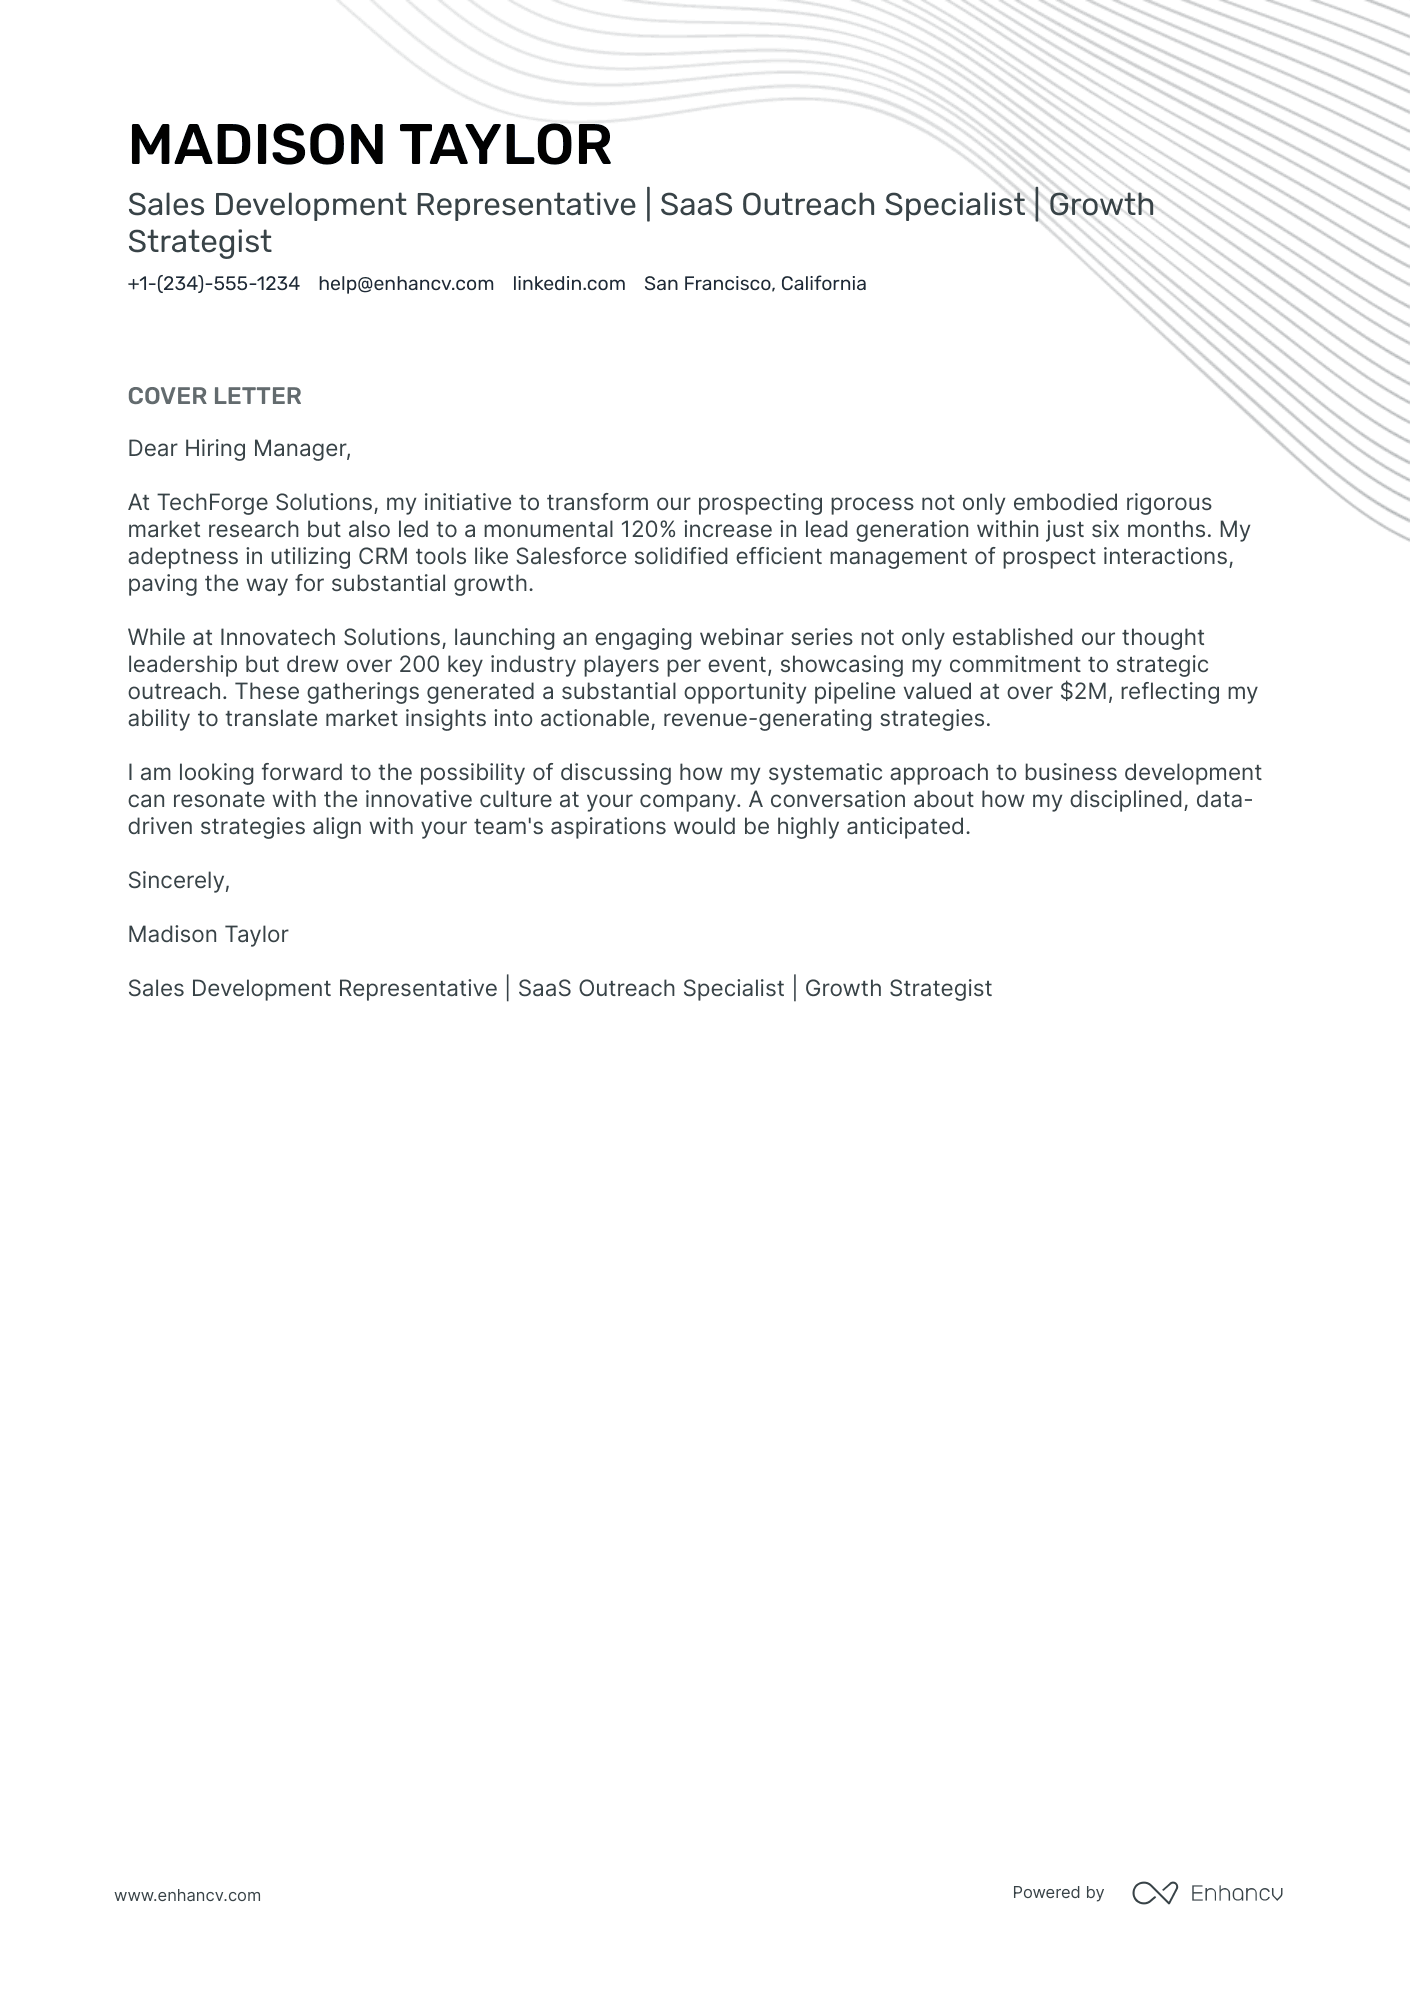 short application letter for sales representative with no experience